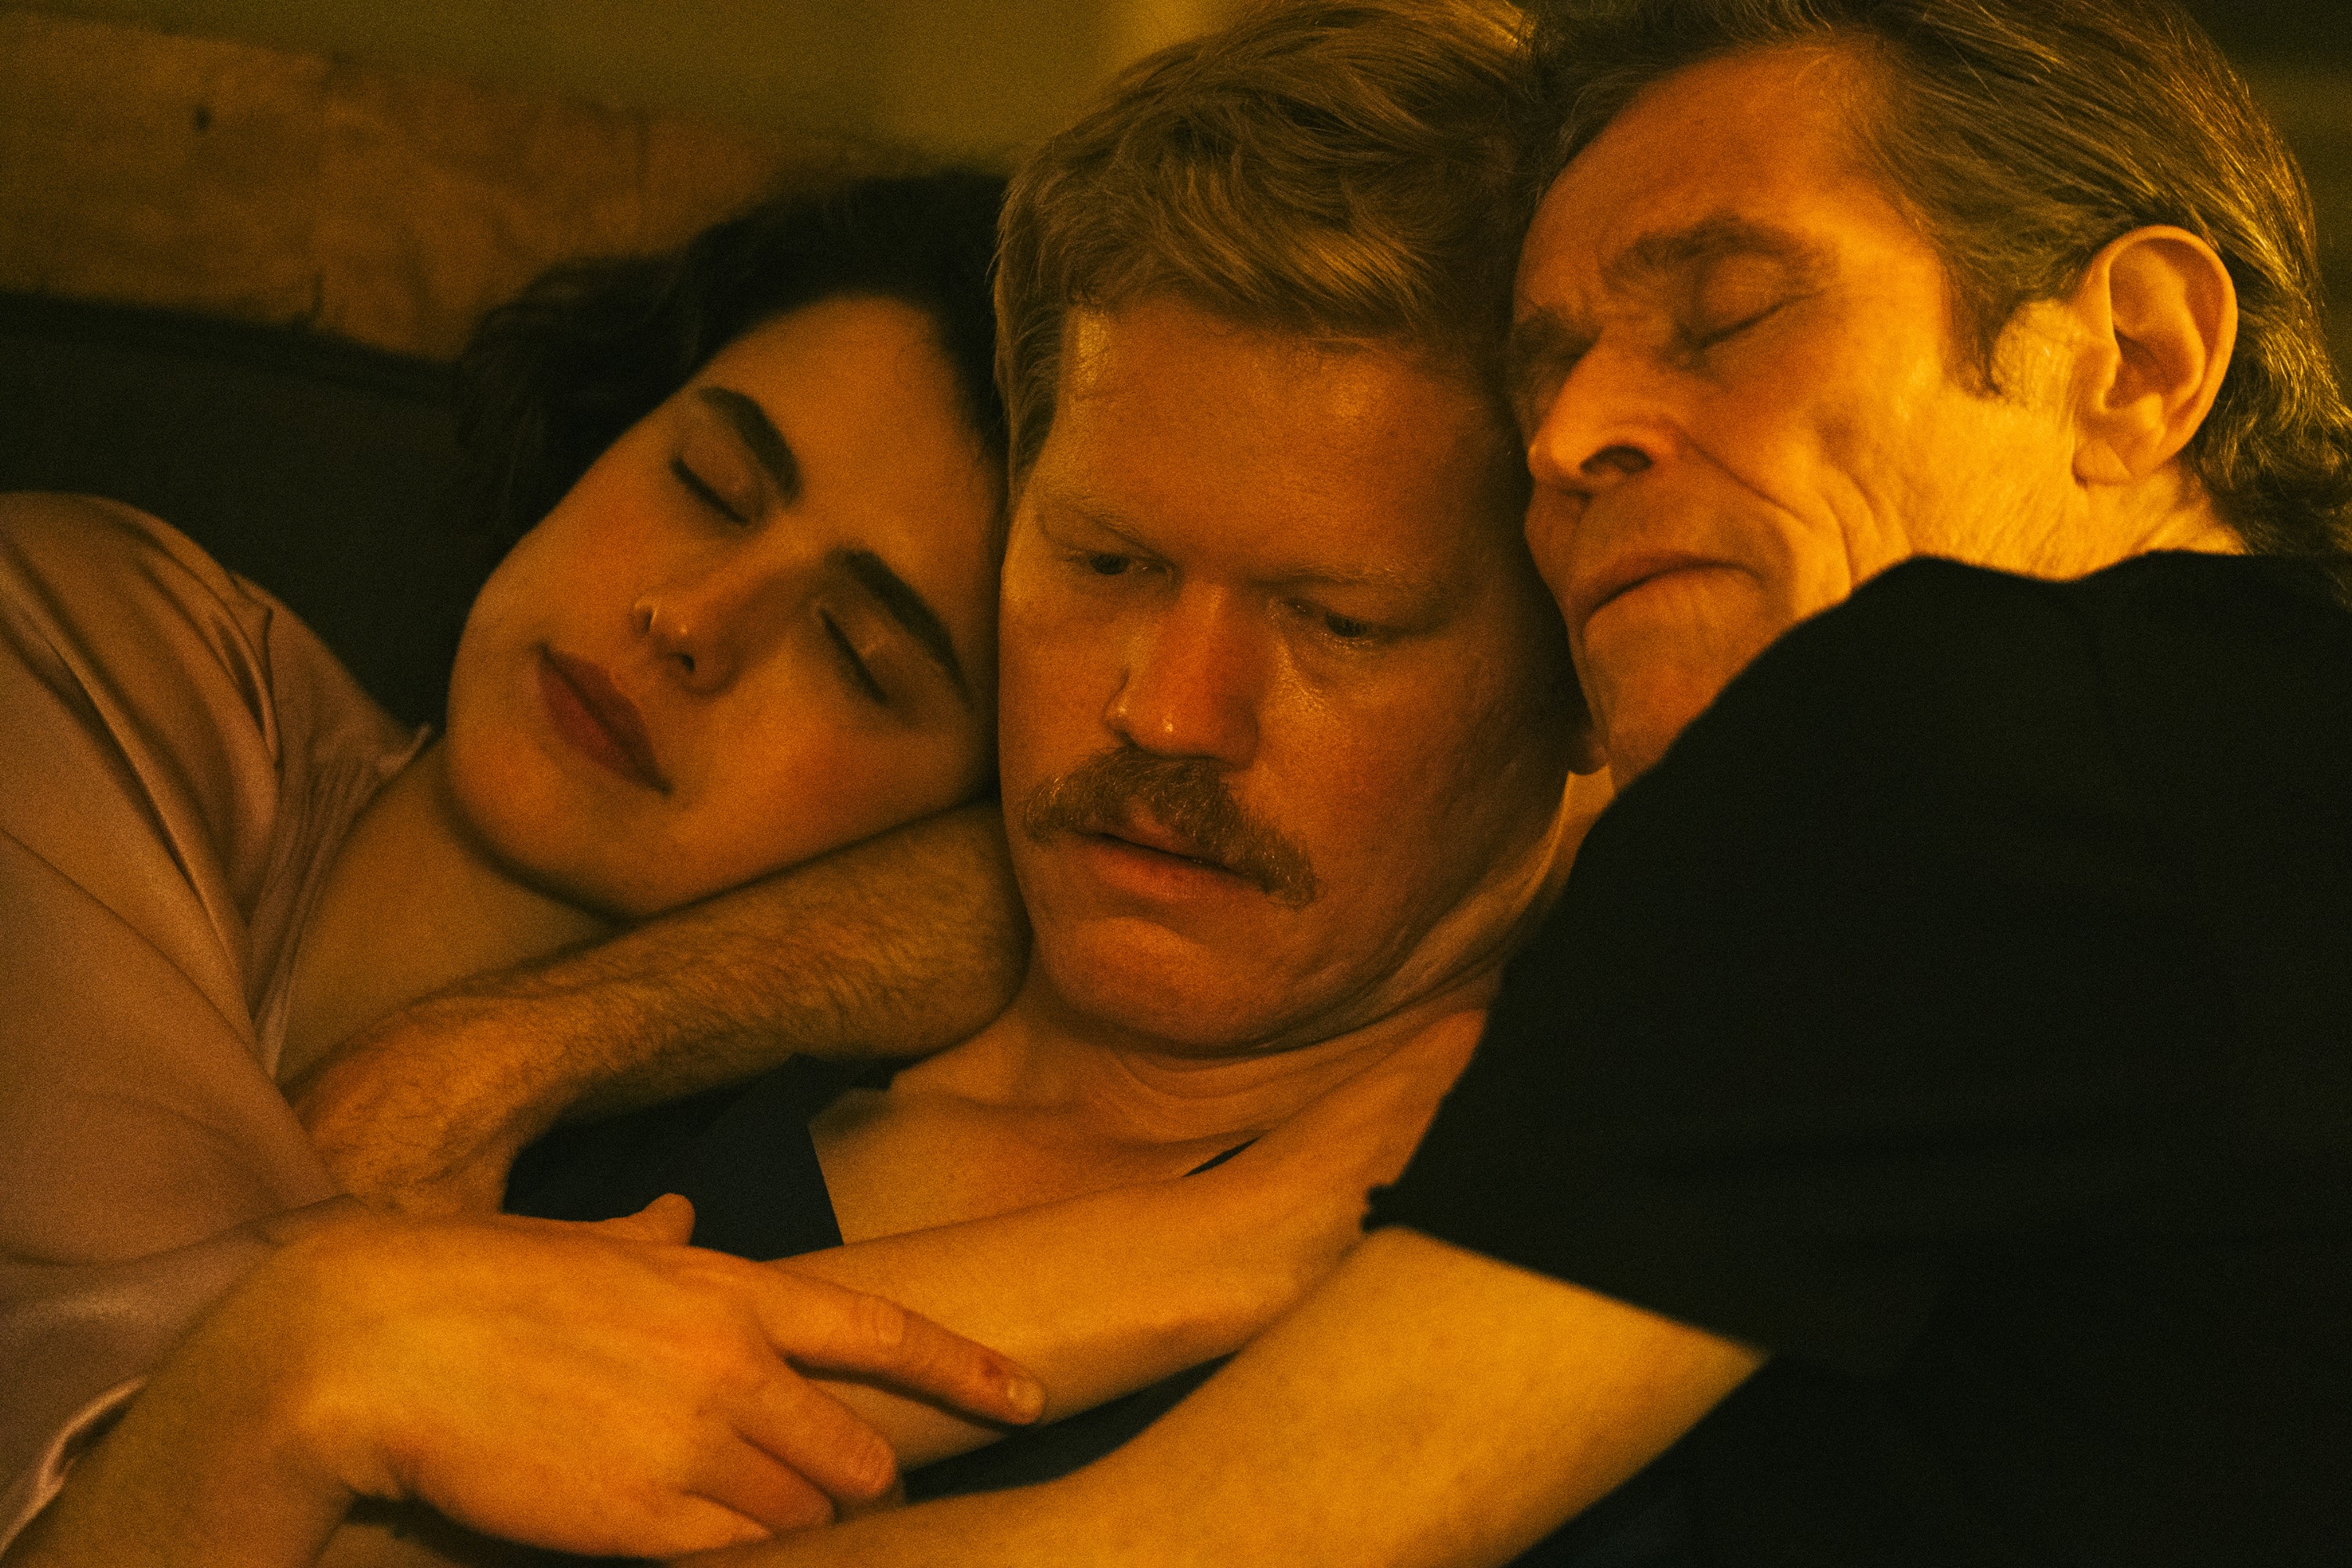 KINDS OF KINDNESS, from left: Margaret Qualley, Jesse Plemons, Willem Dafoe, 2024. © Searchlight Pictures / courtesy Everett Collection